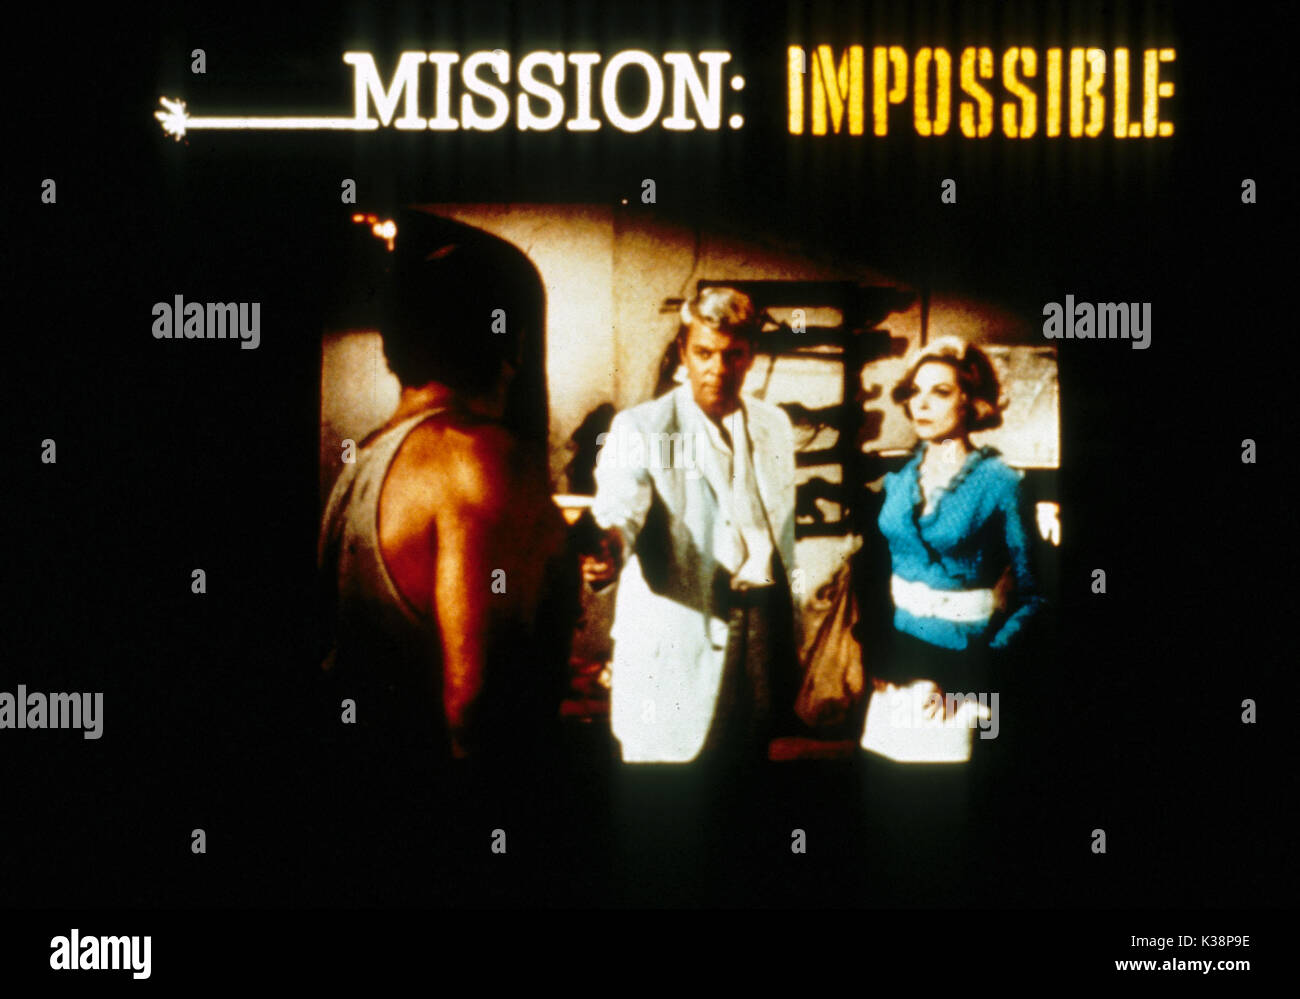 MISSION: IMPOSSIBLE PETER GRAVES, BARBARA BAIN Stockfoto